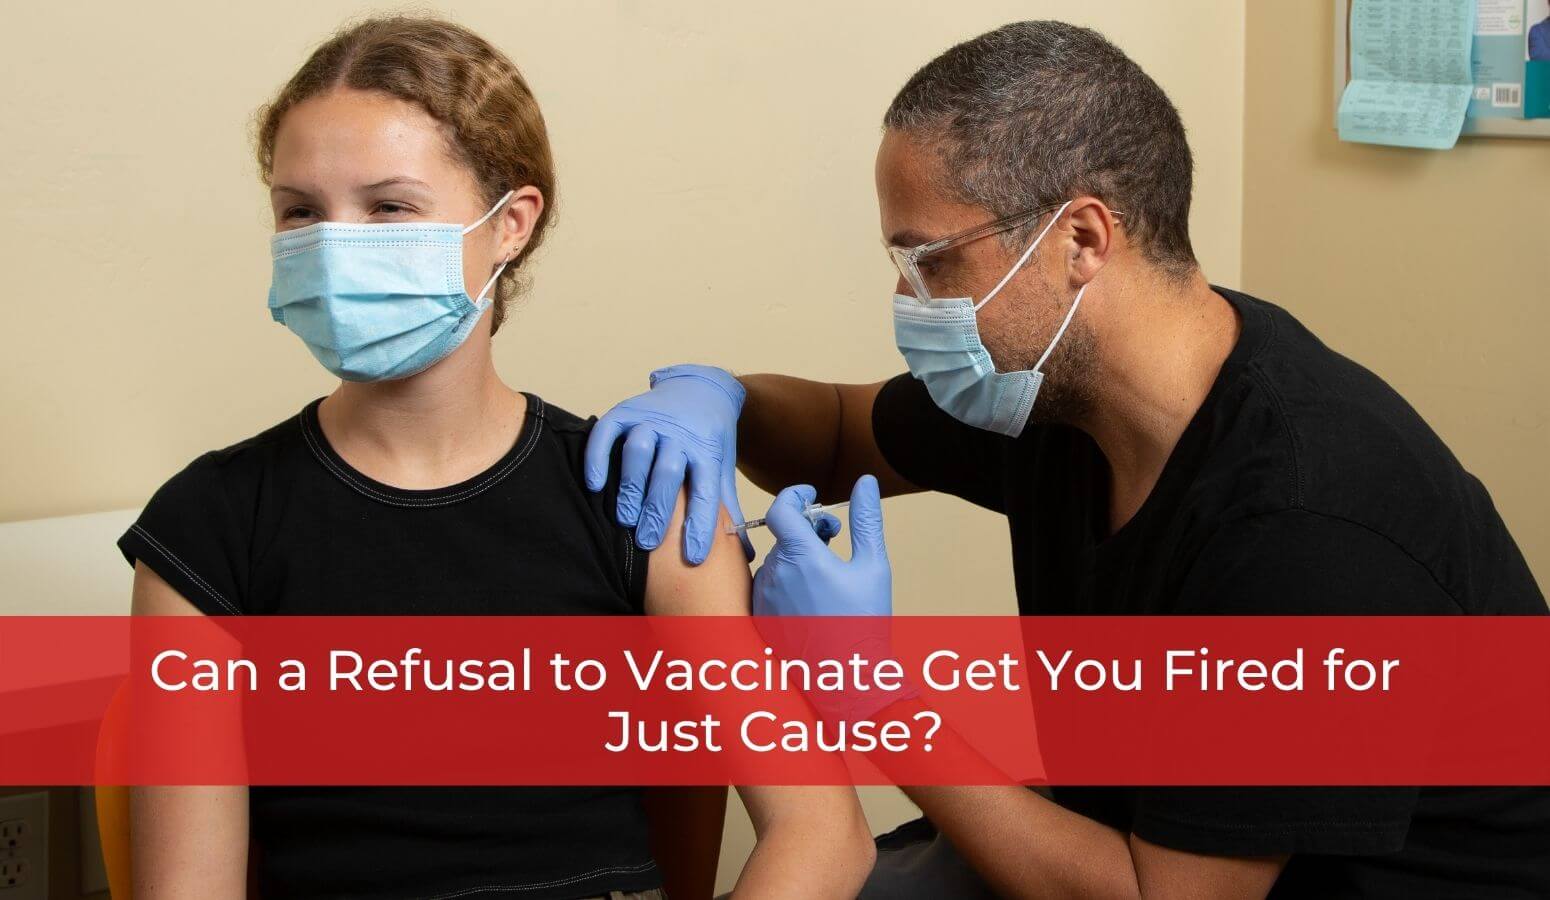 Featured image for “Can a Refusal to Vaccinate Get You Fired for Just Cause?”